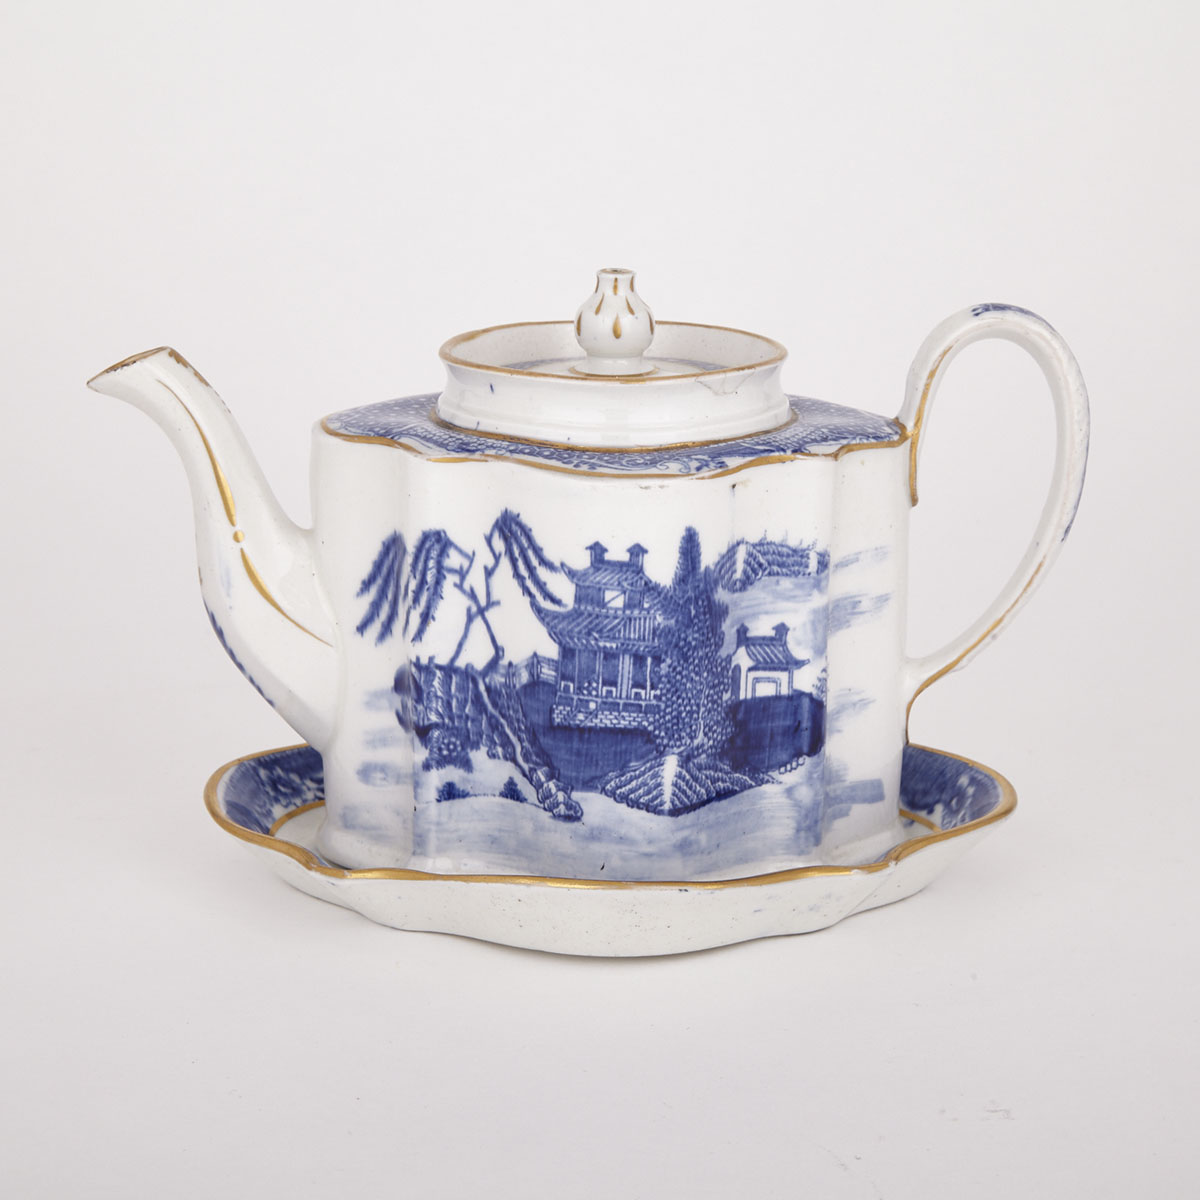 New Hall Blue Printed Teapot and Stand, c.1800